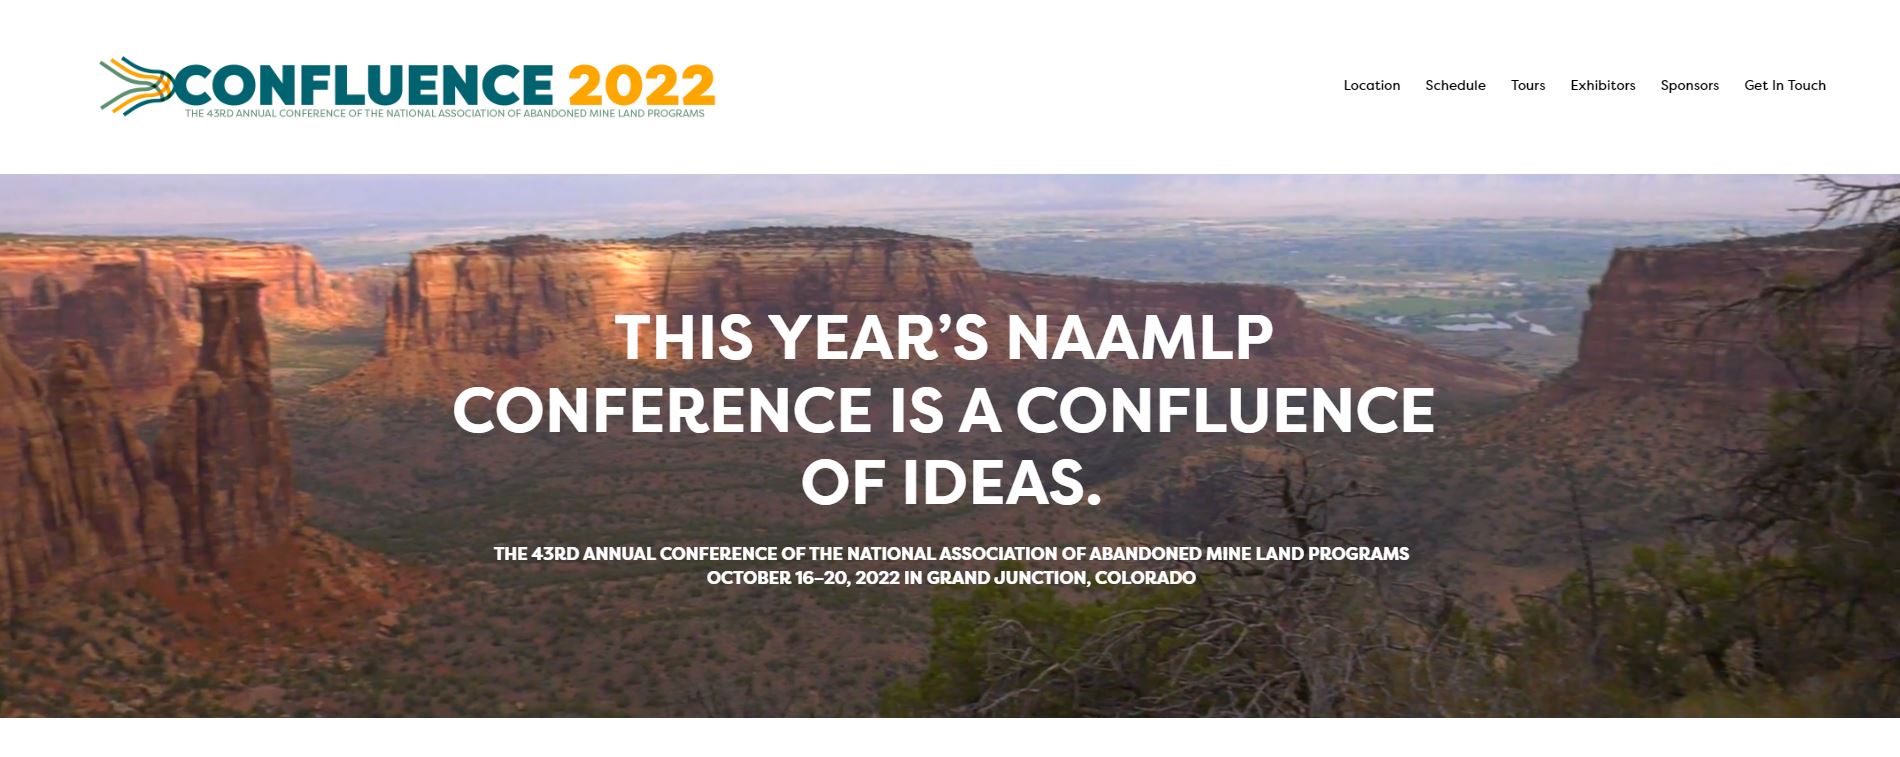 NAAMLP Confluence Conference 2022